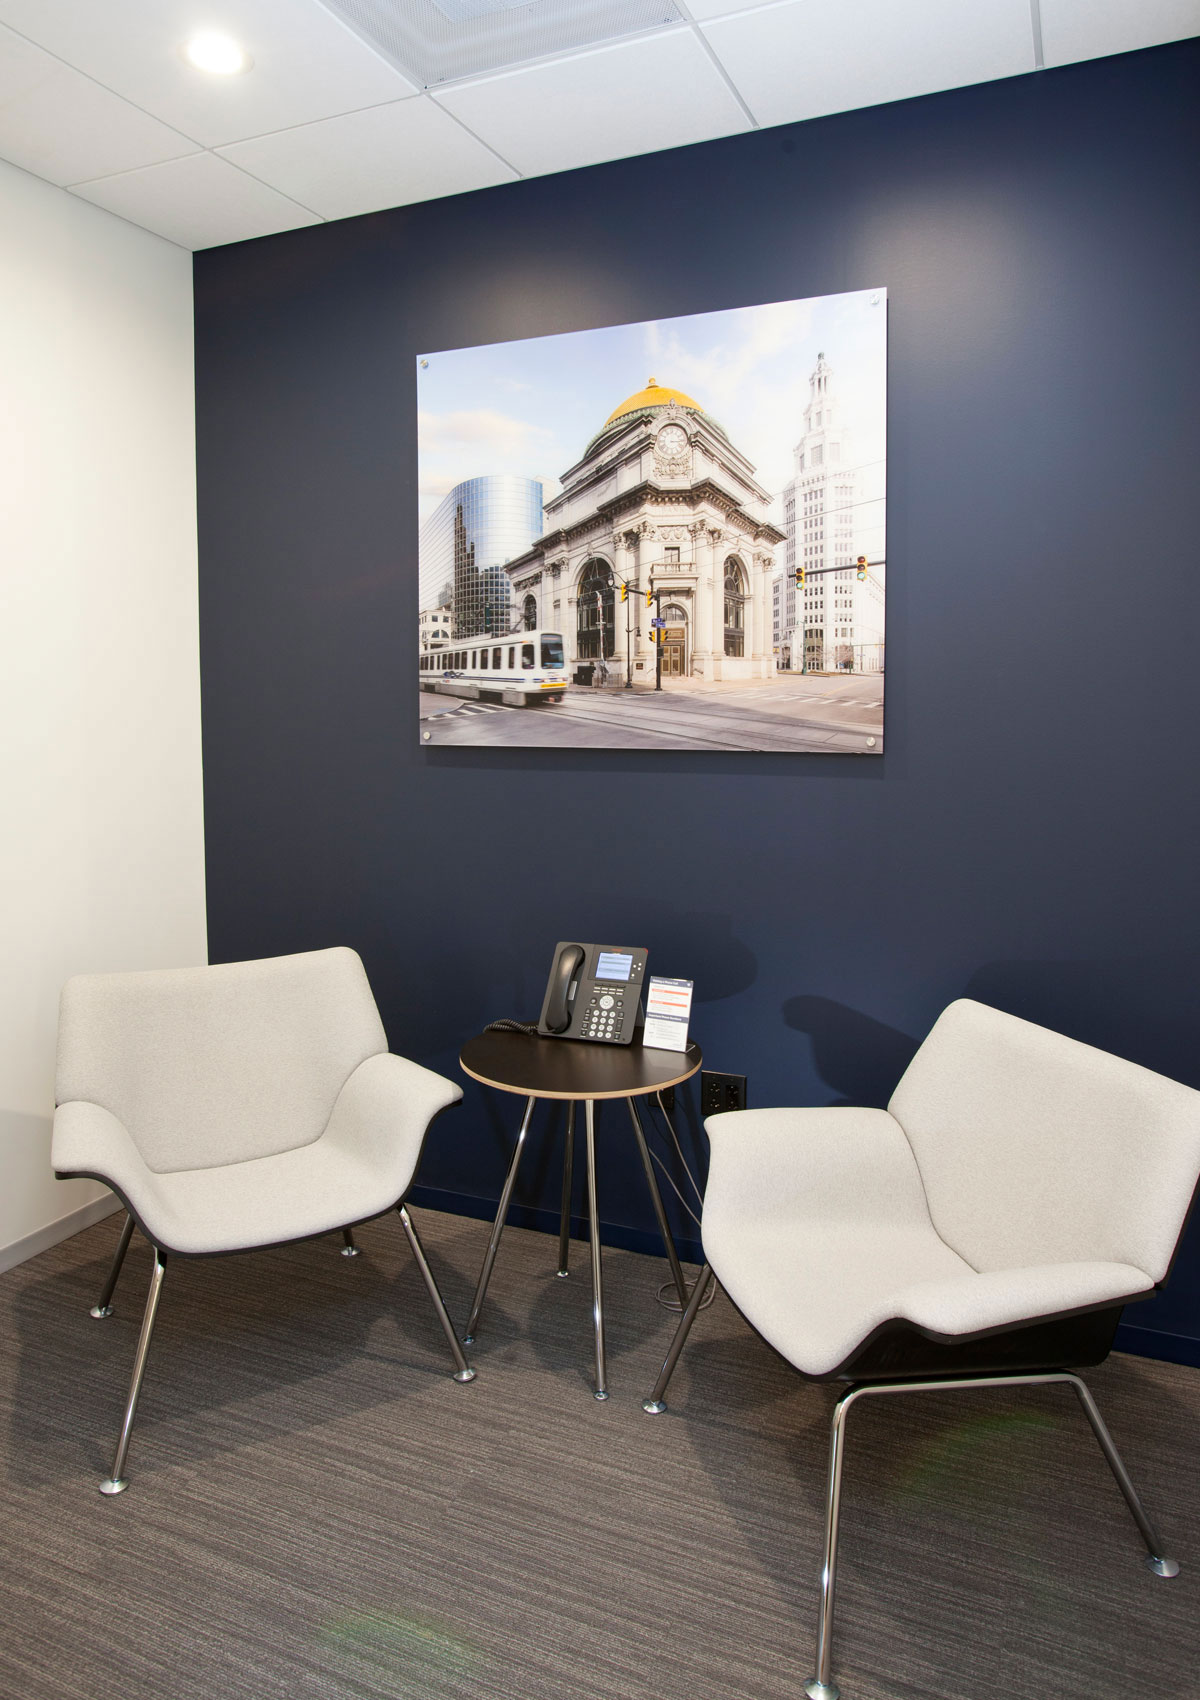 Interior of phone room with large photo of Gold dome bank